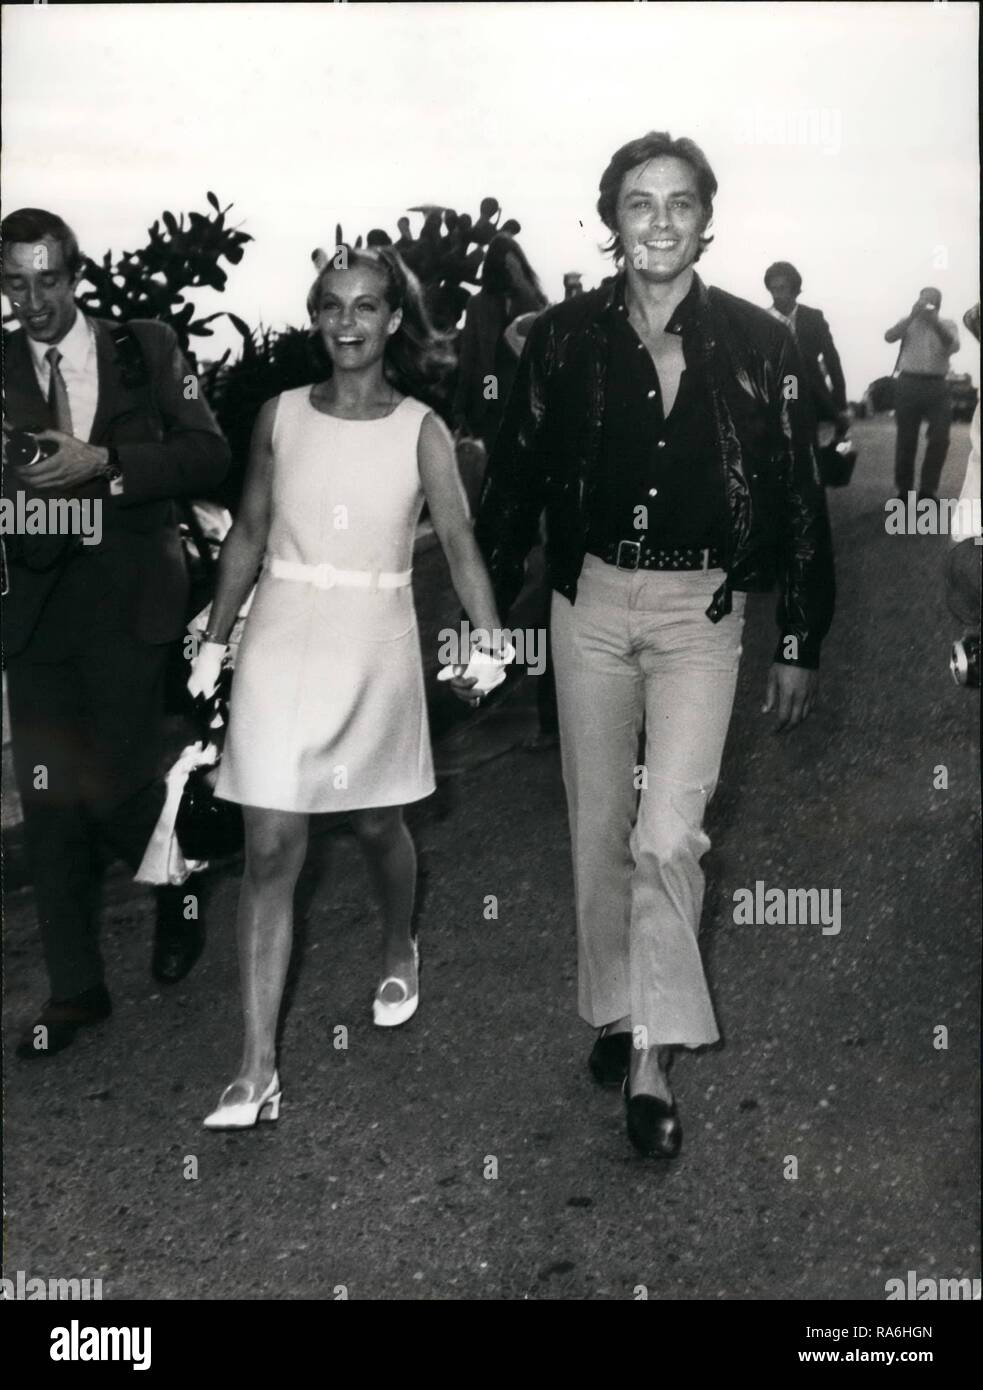 Aug. 08, 1968 - Alain Delon to co-star with Romy Schneider: First reunion in five years: Alain Delon and omy Schneider who will co-star in Jacoues Deray's film ''La Piscine'' (the swimming pool) met as friends and screen partners for the first time in five years. The couple broke their engagement after a long idyl. Photo shows Alain Delon and Romy Schneider pictured in nice the shooting of the film will soon start on the French Riviera. (Credit Image: © Keystone Press Agency/Keystone USA via ZUMAPRESS.com) Stock Photo